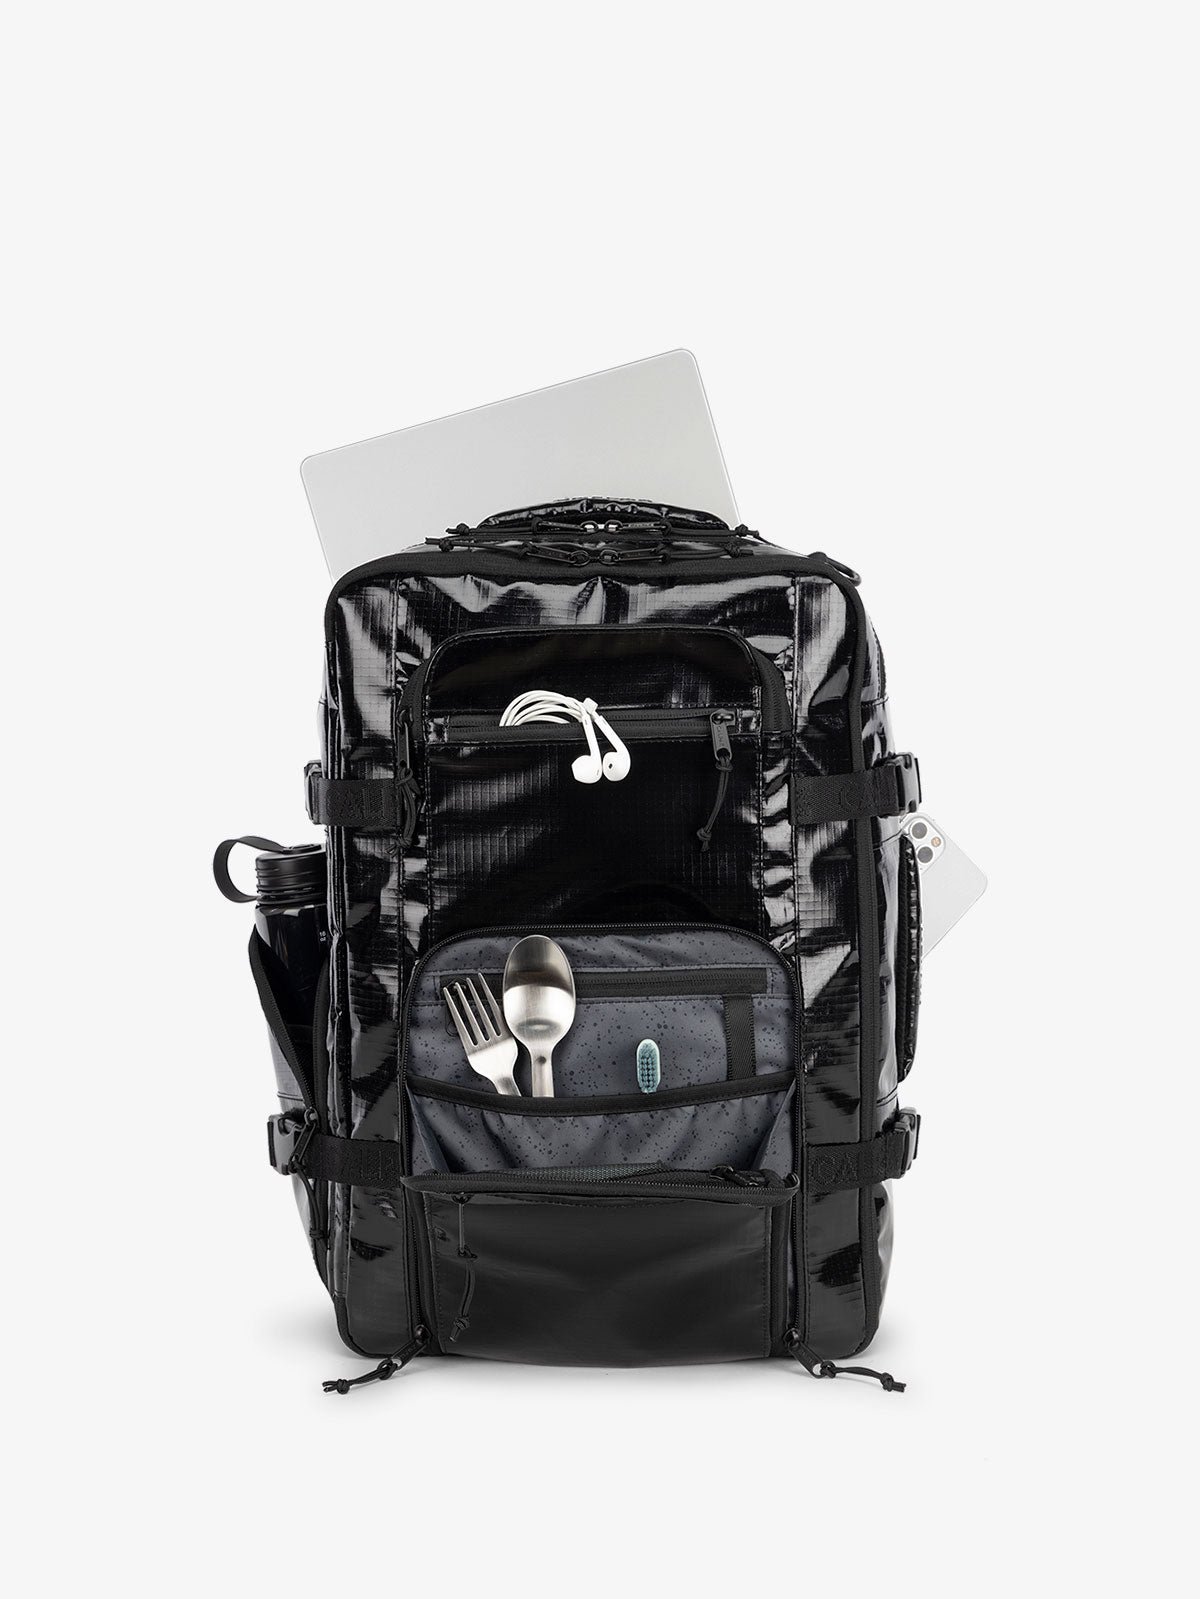 terra 26l backpack duffel with compressions straps